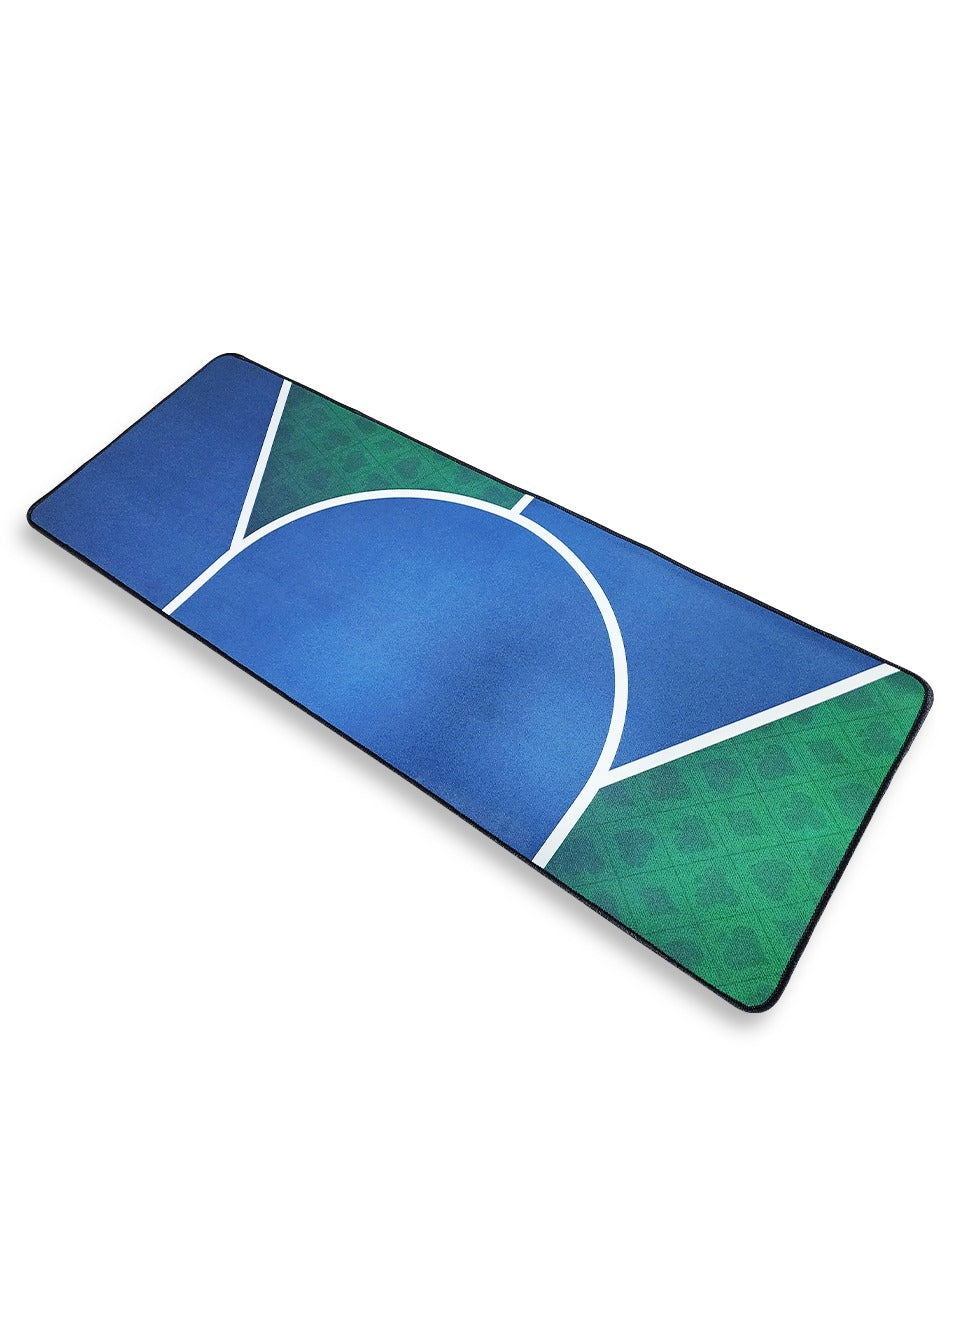 Gaming Mouse Pad -Colour Designs- Size 80X30 CM - Stitched Edges Anti-slip rubber base - Optimized for all mouse sensitivities and sensors - Model Mix Pads KK24